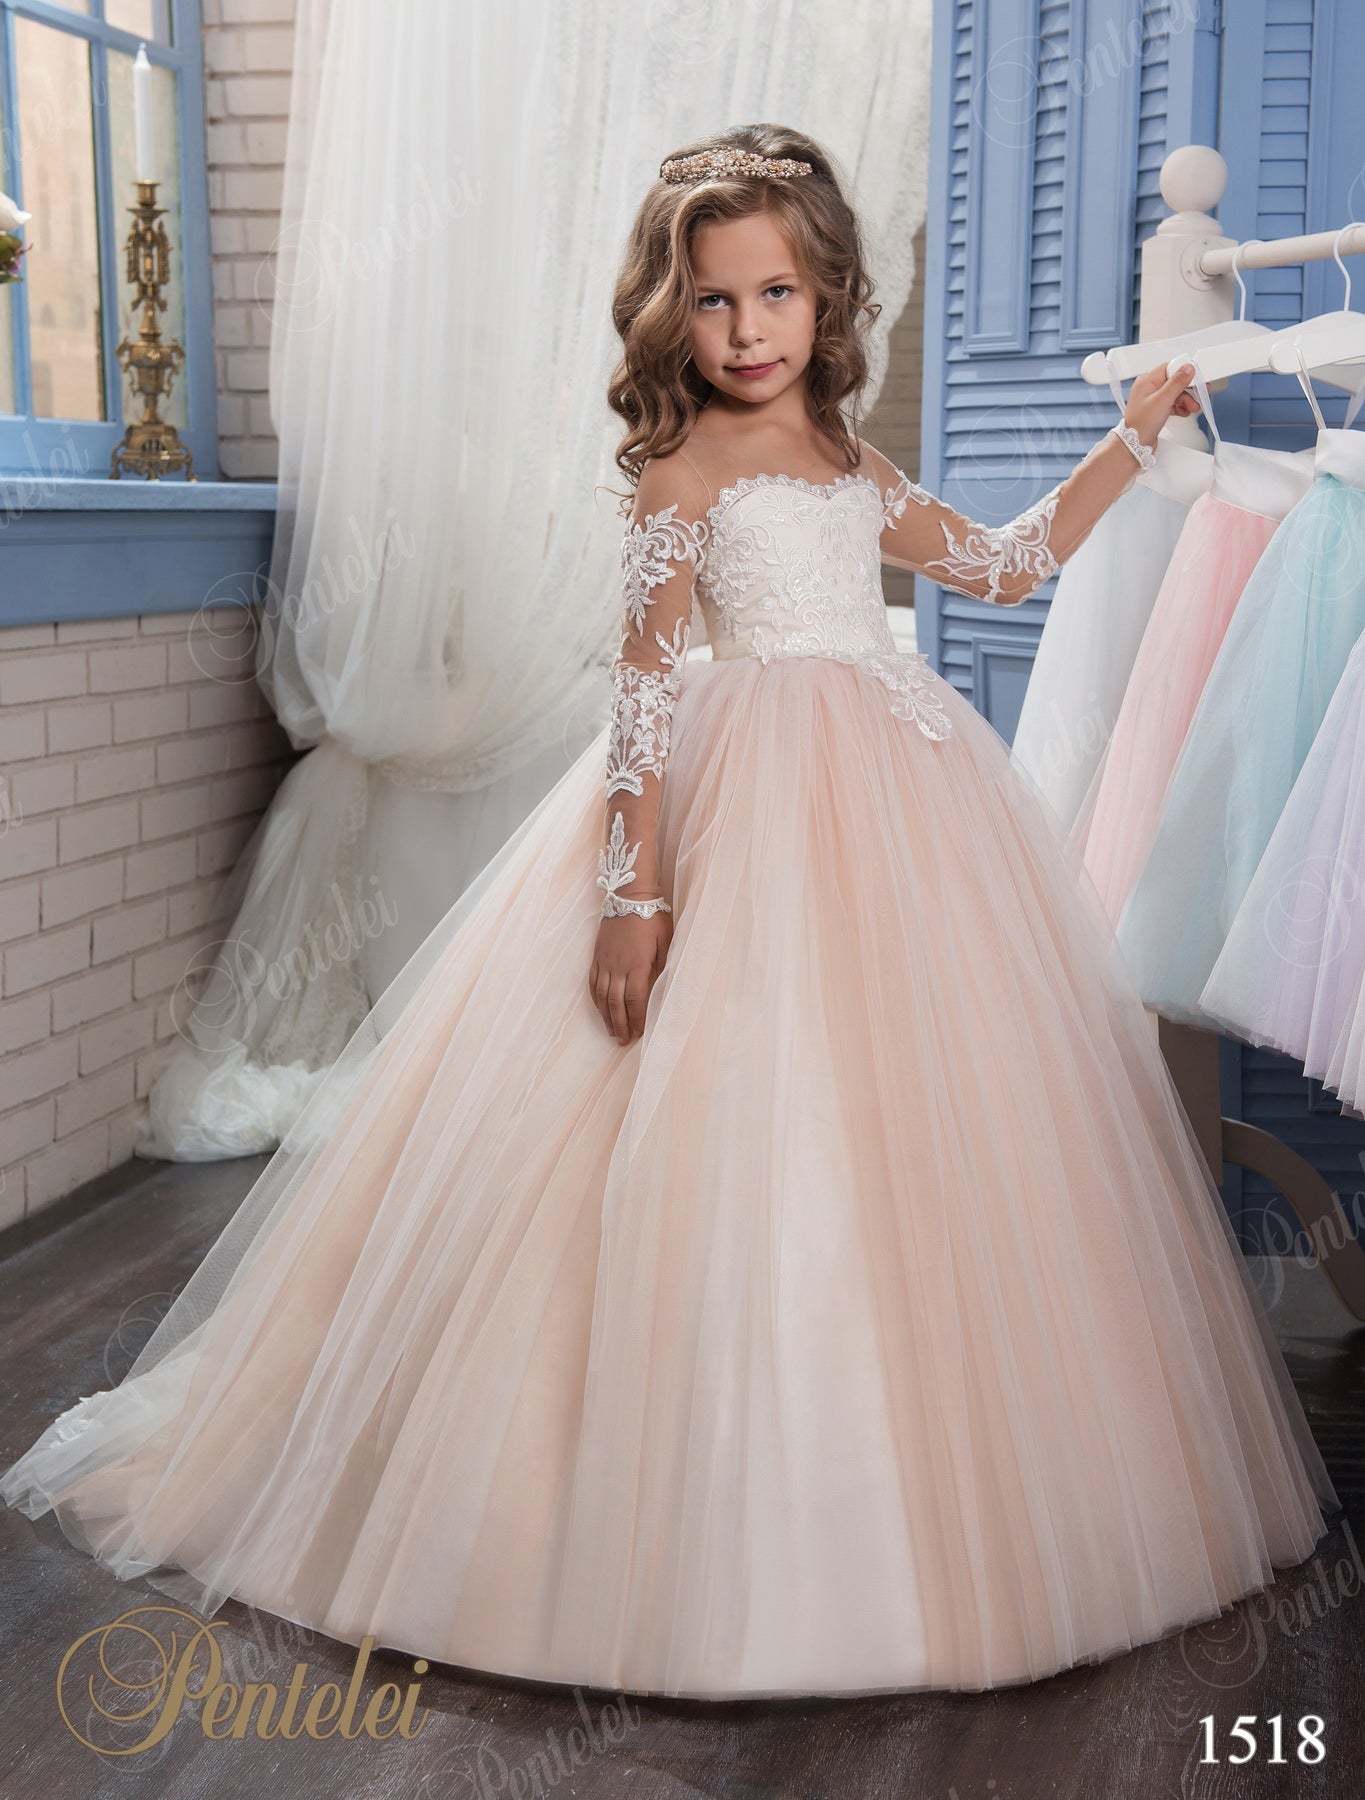 Women's Quince Dresses from $40